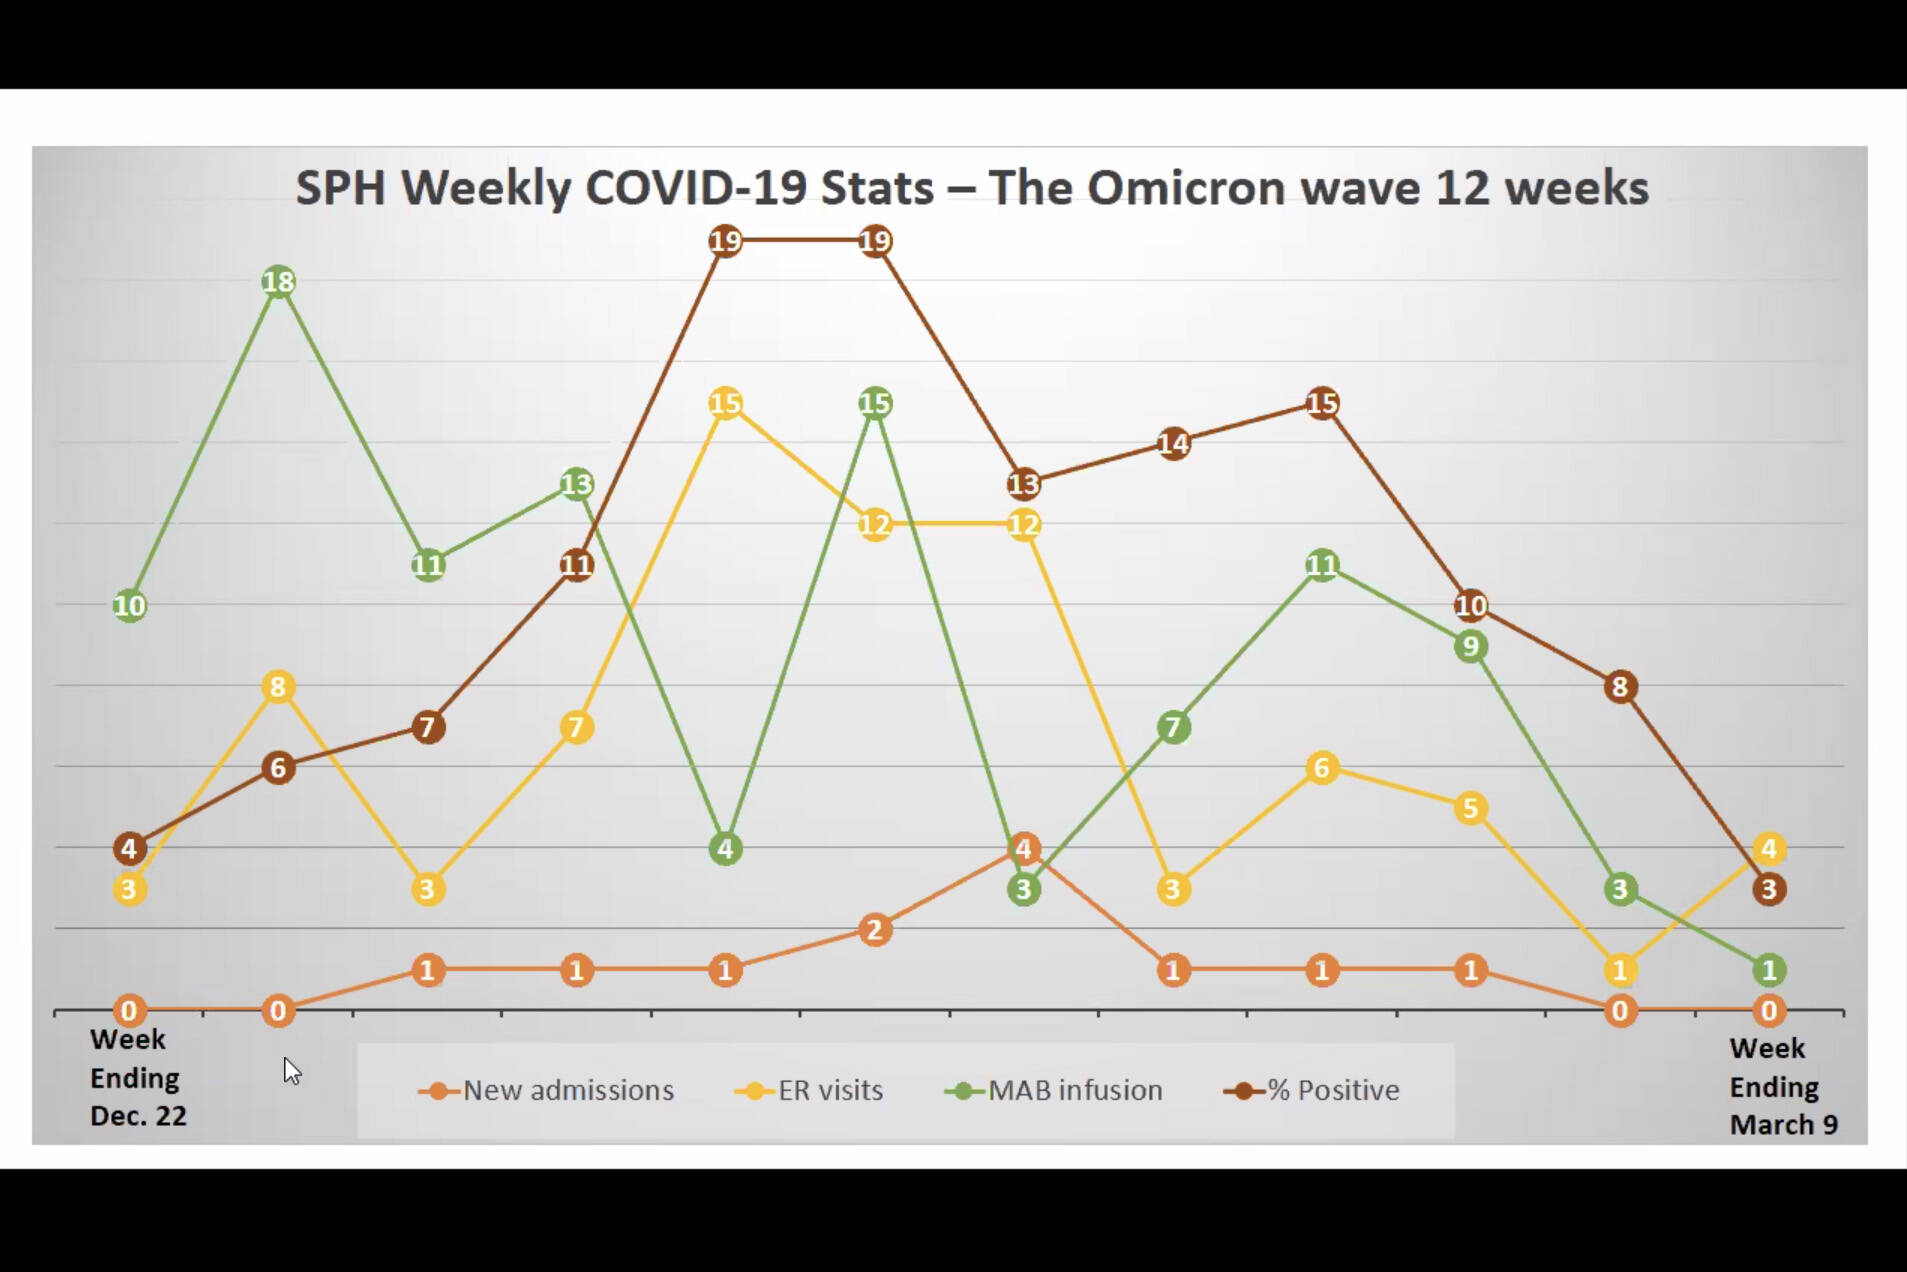 This graph created by South Peninsula Hospital shows the trends in the COVID-19 and omicron wave over the past 12 weeks though March 9 based on data collected through the hospital, with information on percentage of positive cases (brown line), monoclonal antibody infusions (green line), emergency room visits (yellow line) and hospital admissions (orange line). Except for ER visits, there has been a general decline since the week ending March 2. (Graph by South Peninsula Hospital)